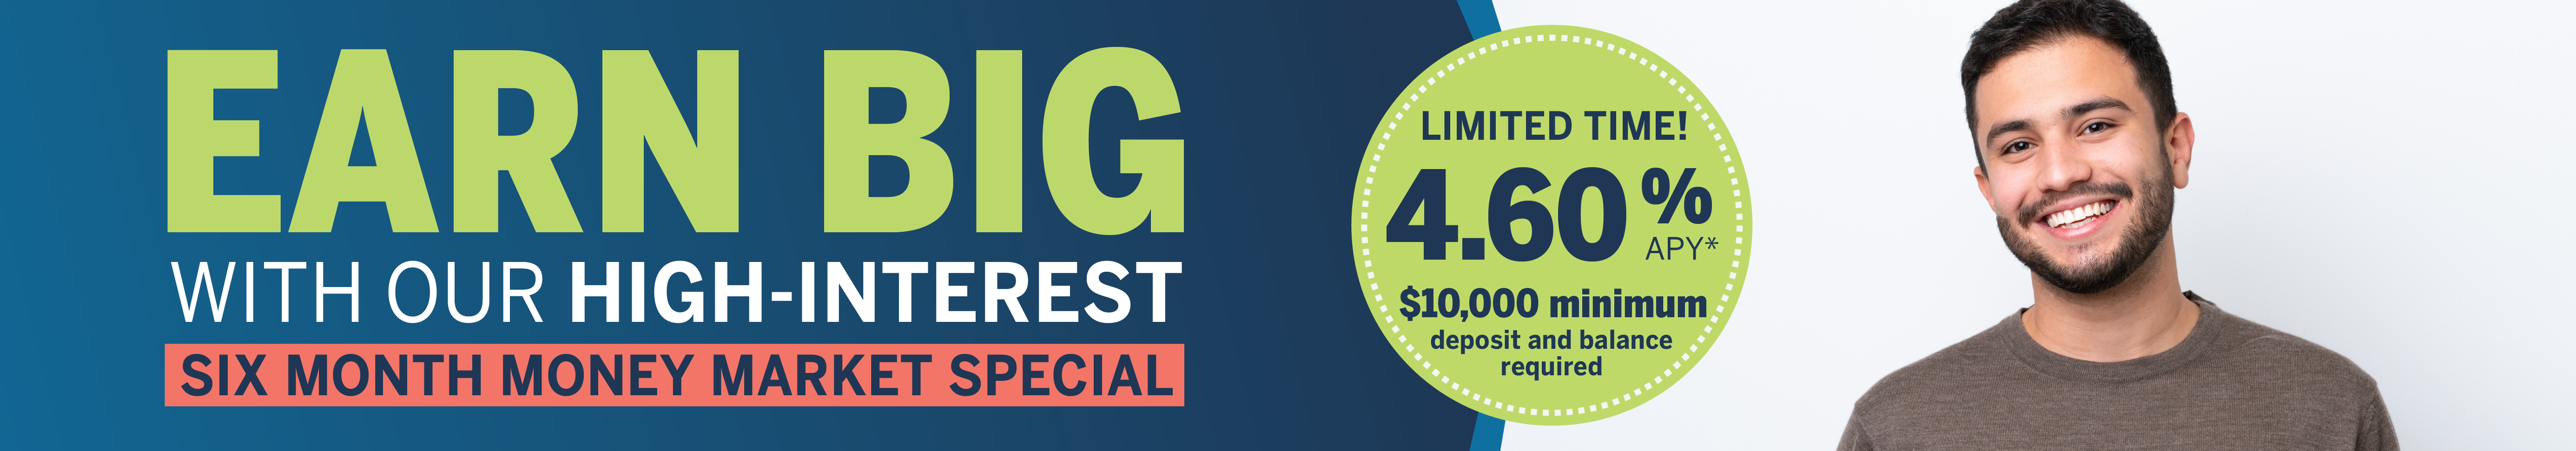 Earn Big with our high interest Six Month Money Market Special.  Limited time! 4.6% A P Y.  $10,000 minimum deposit and balance required.